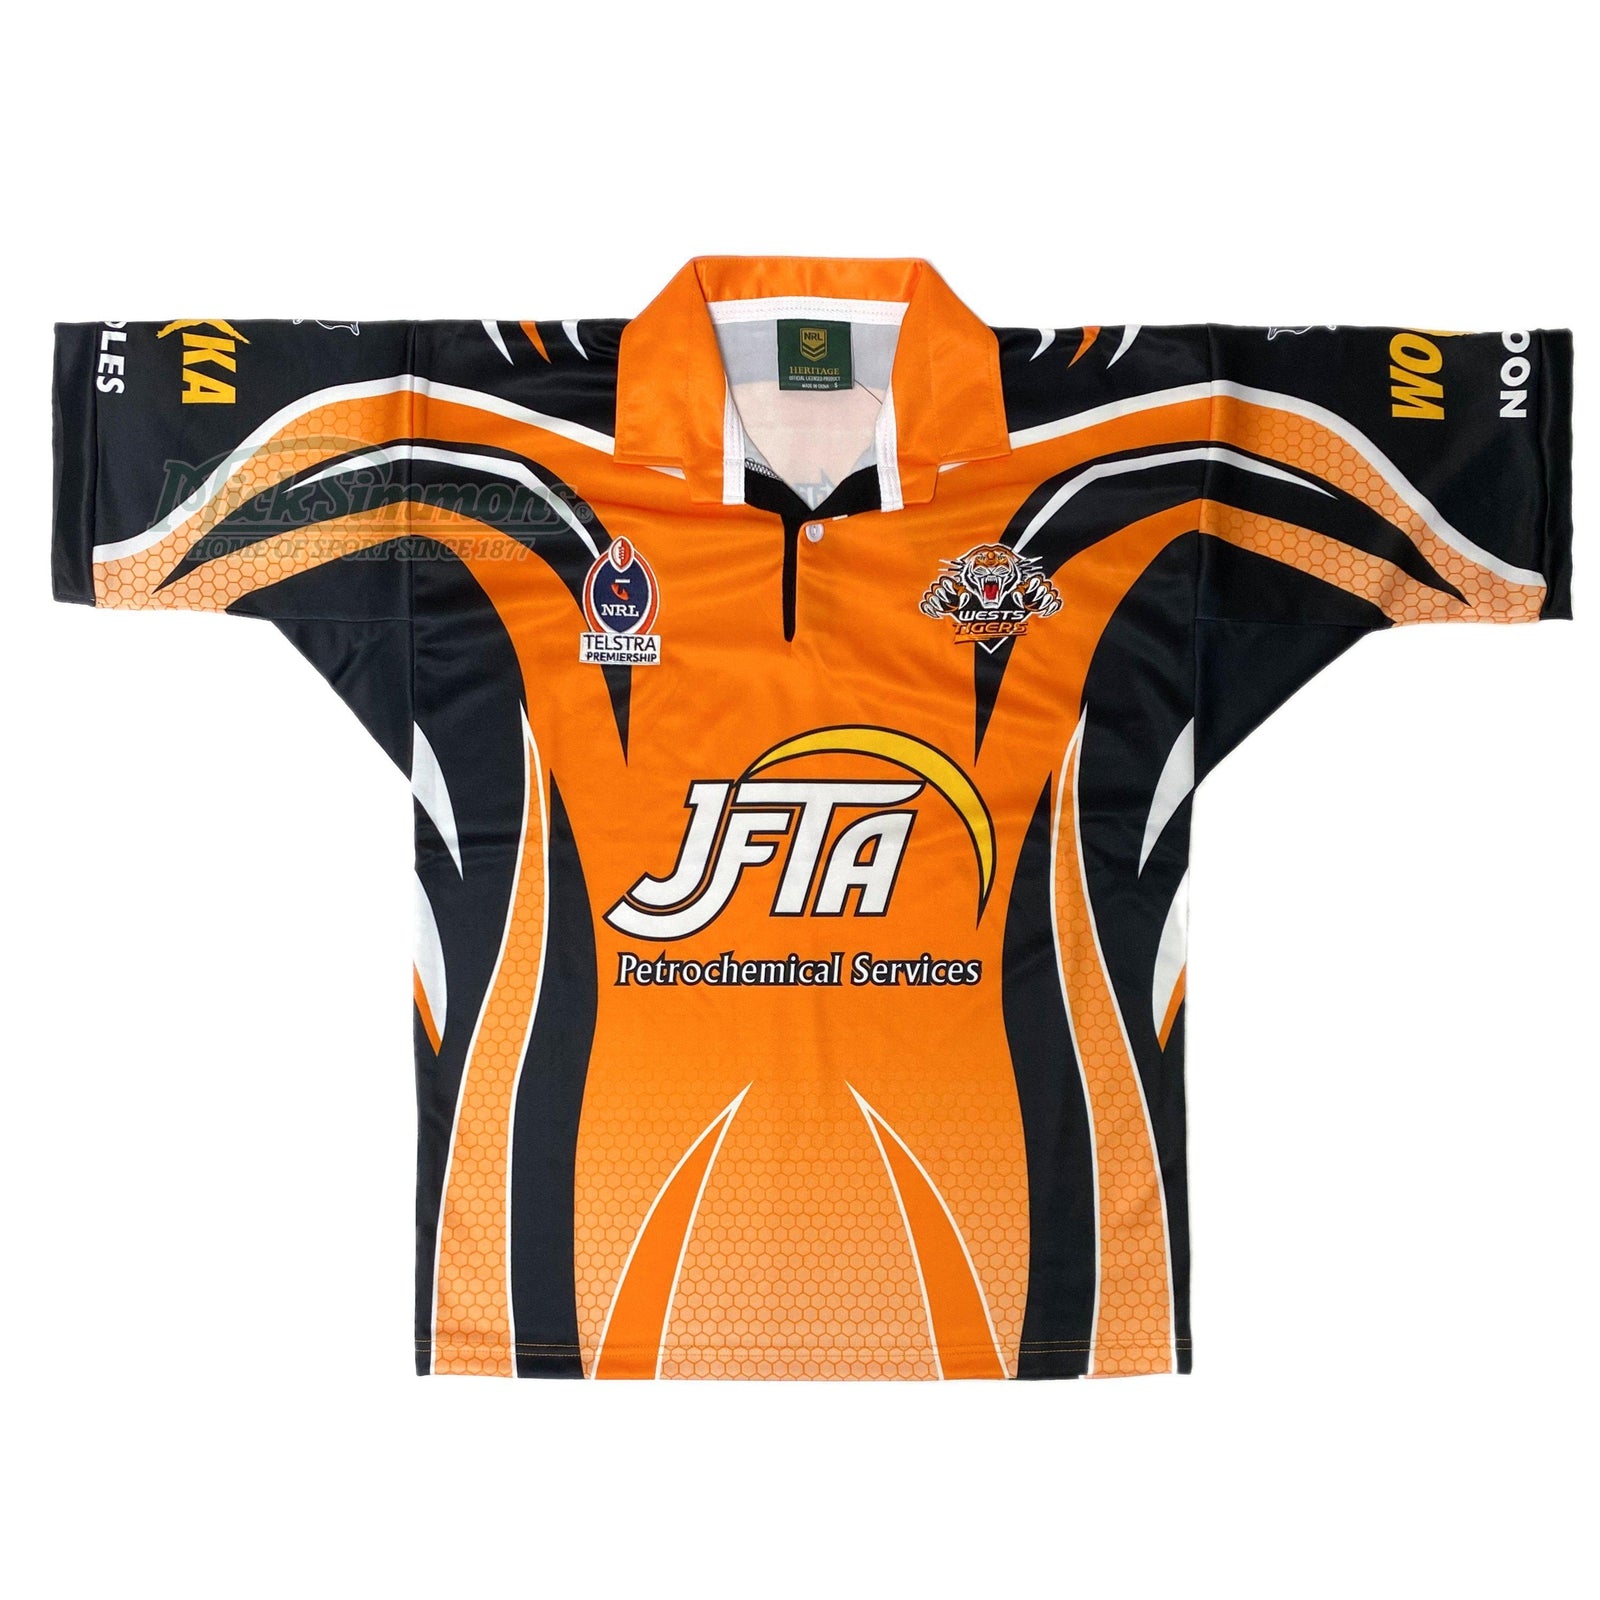 Get the first Wests Tigers Heritage Jersey!